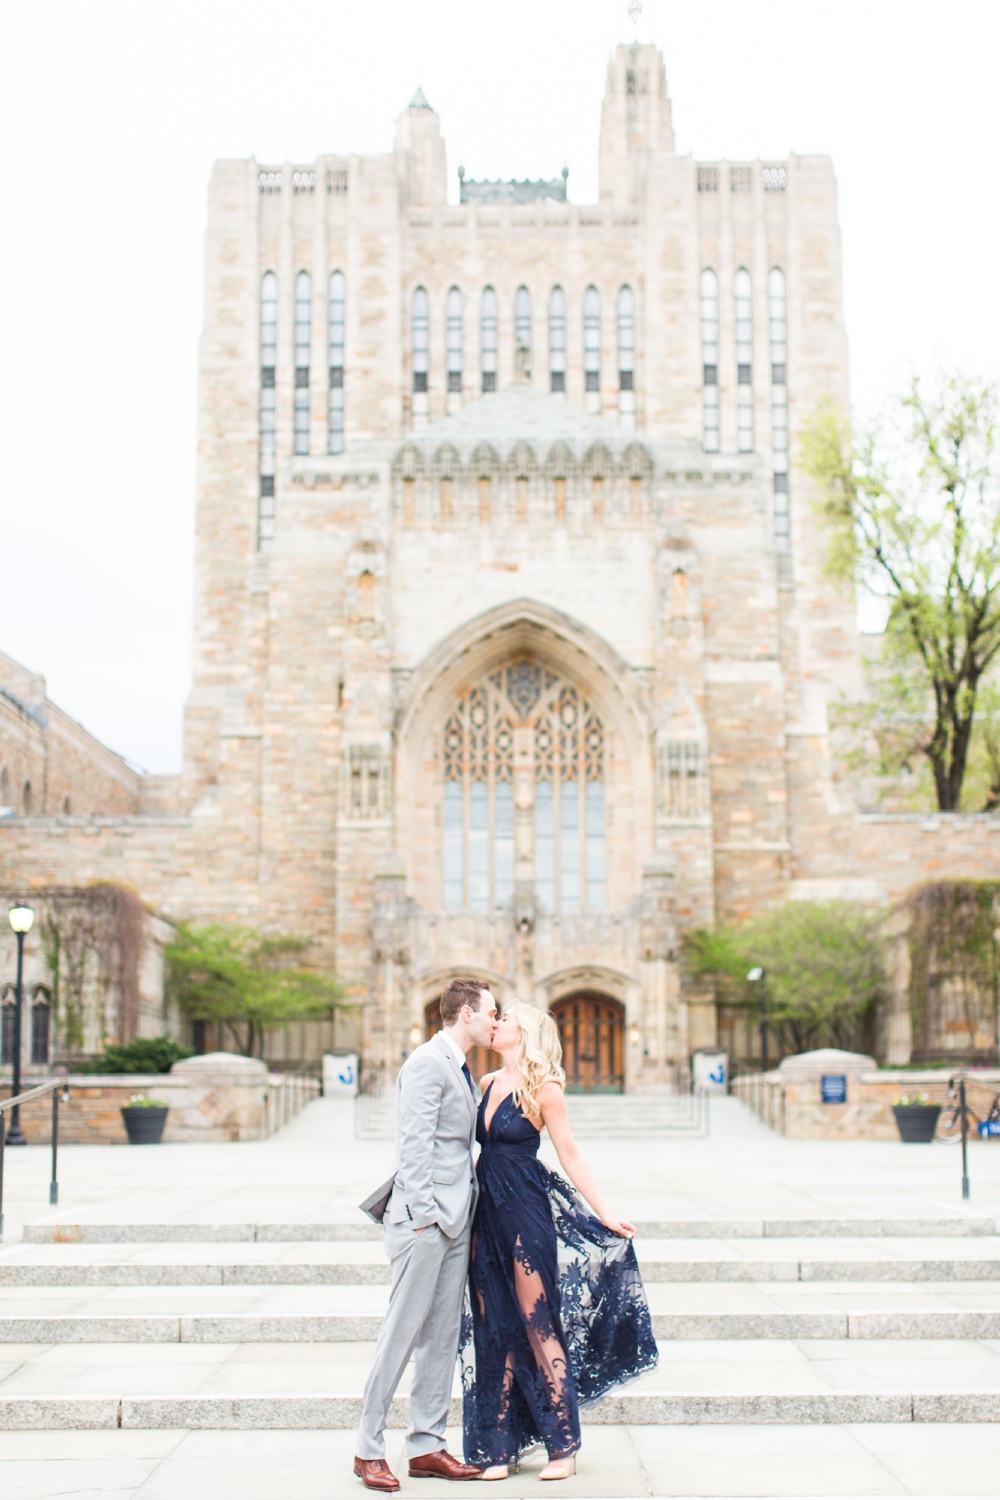 sterling-library-yale-university-engagement-session-new-haven-connecticut-wedding-photographer-andrea-chris-shaina-lee-photography-photo